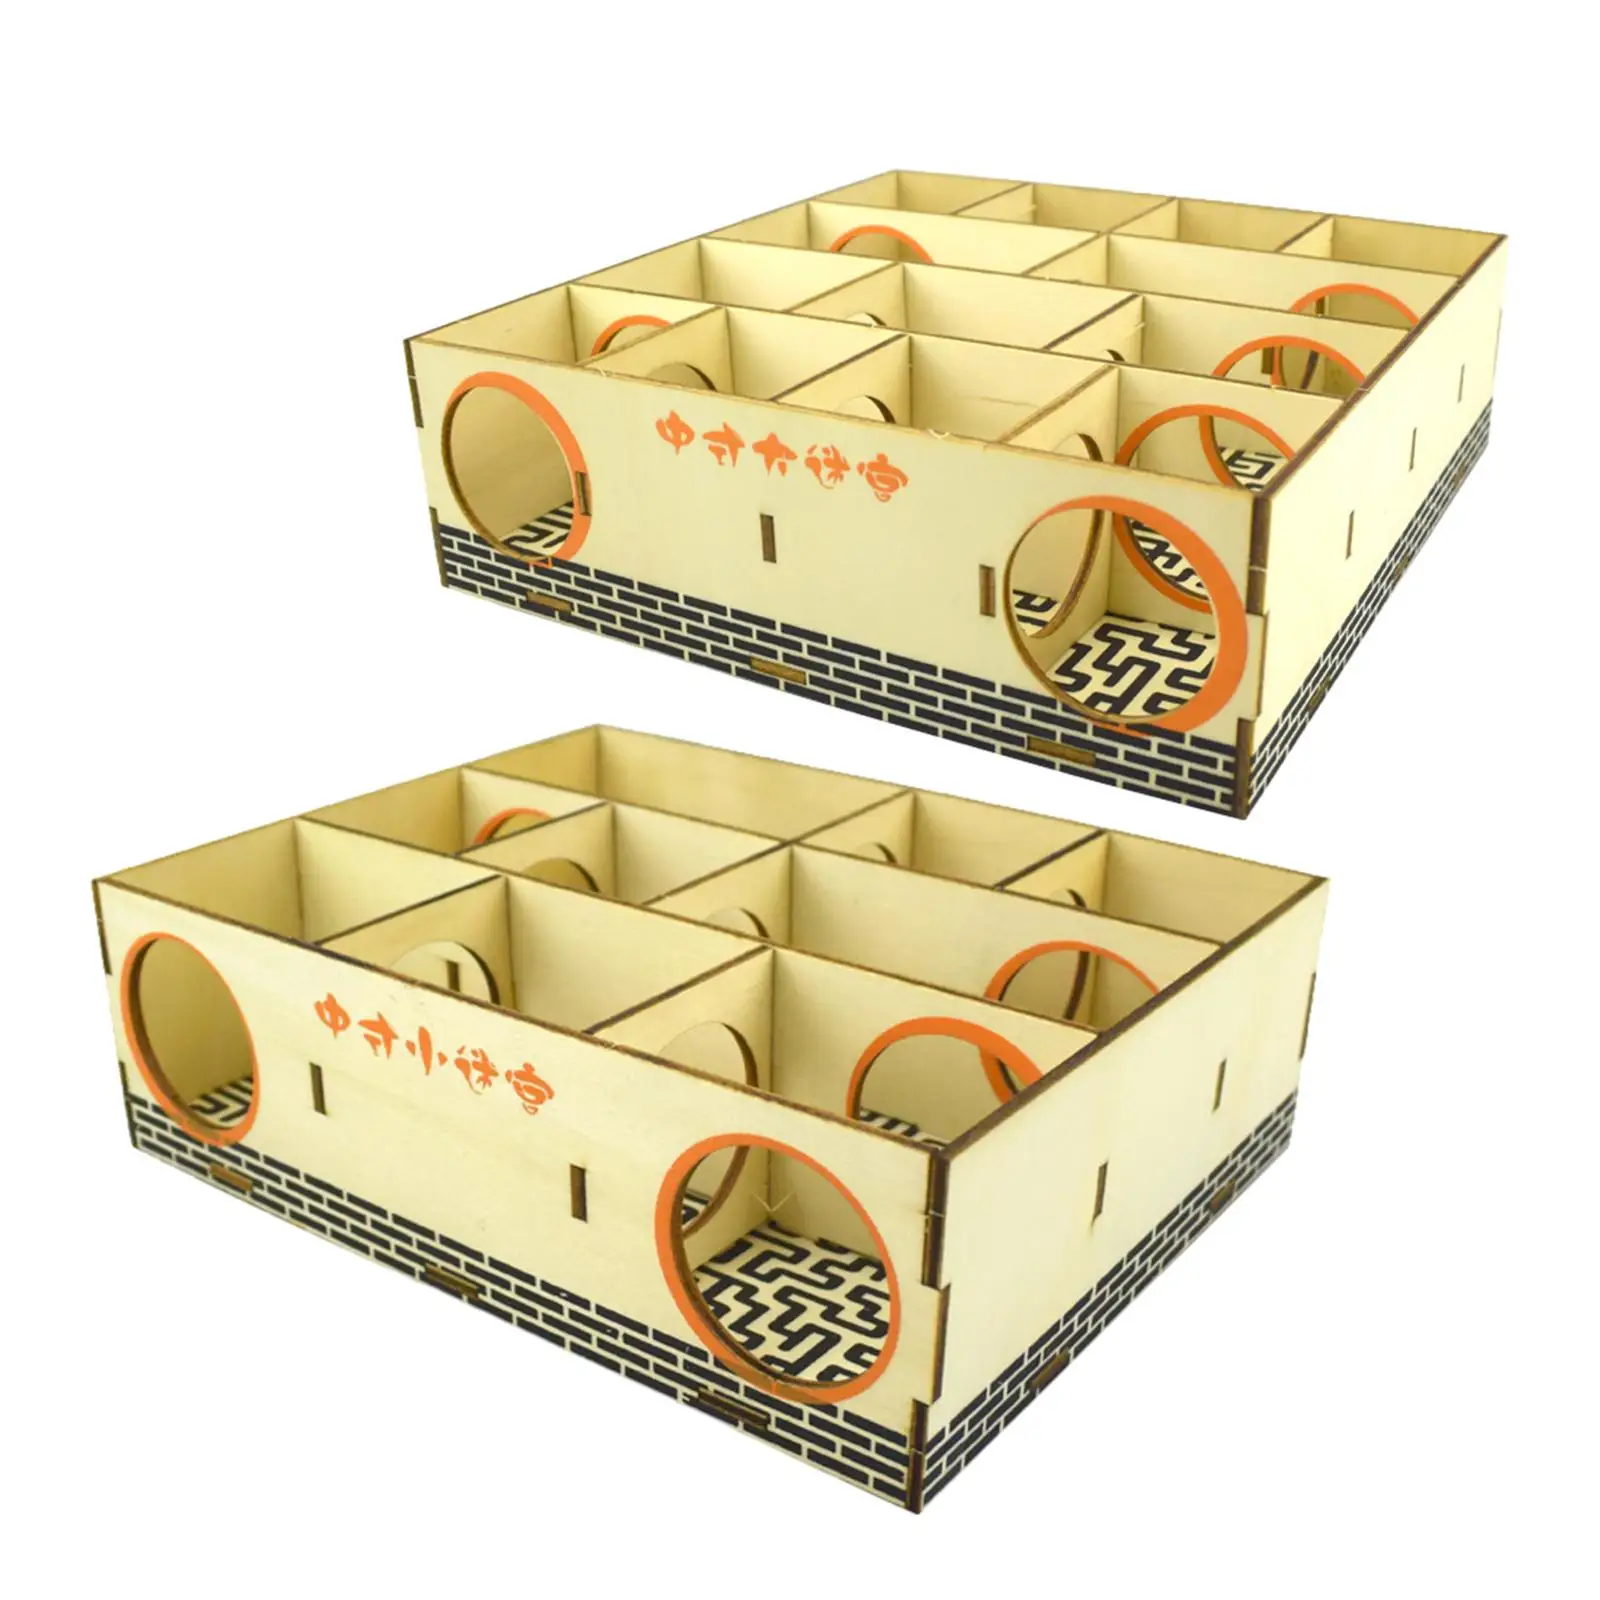 Hamster Maze Playhouse Small Animals Puzzle Toy Mice Wooden Hamster House